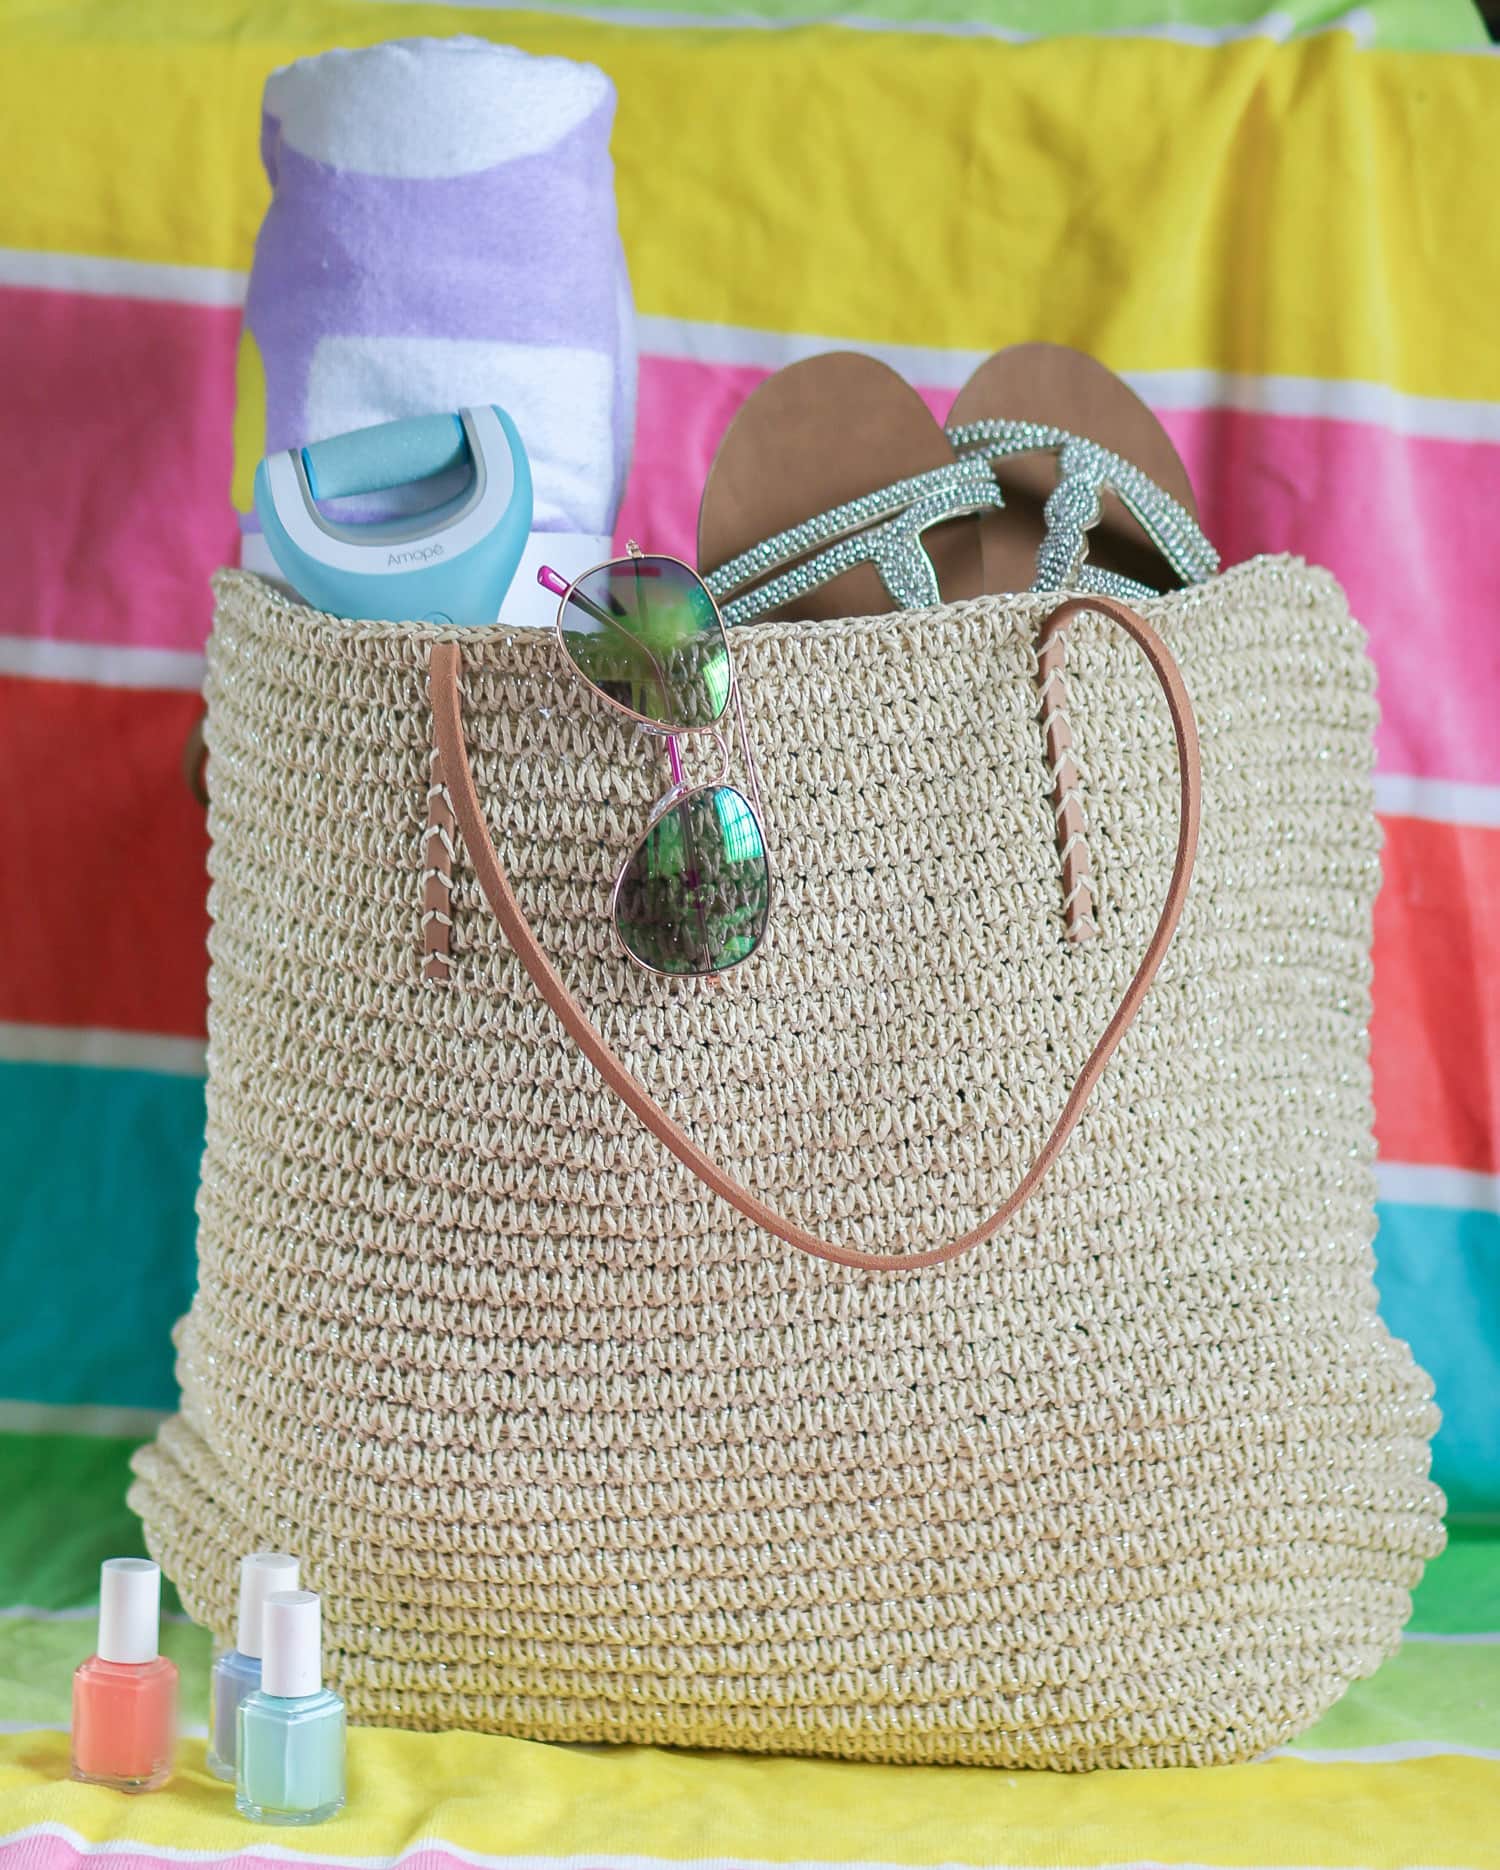 Looking for a cute gift idea for the beach babes in your life? I'm sharing two easy DIY birthday gifts that are guaranteed to put a smile on her face! Beach lovers will love this beach bag filled with summer fashion and beauty essentials, and I'm also sharing a gift idea that's perfect for girly girls. The best part is that everything is from @target ! Click through this pin to see both gift ideas from Ashley Brooke Nicholas!